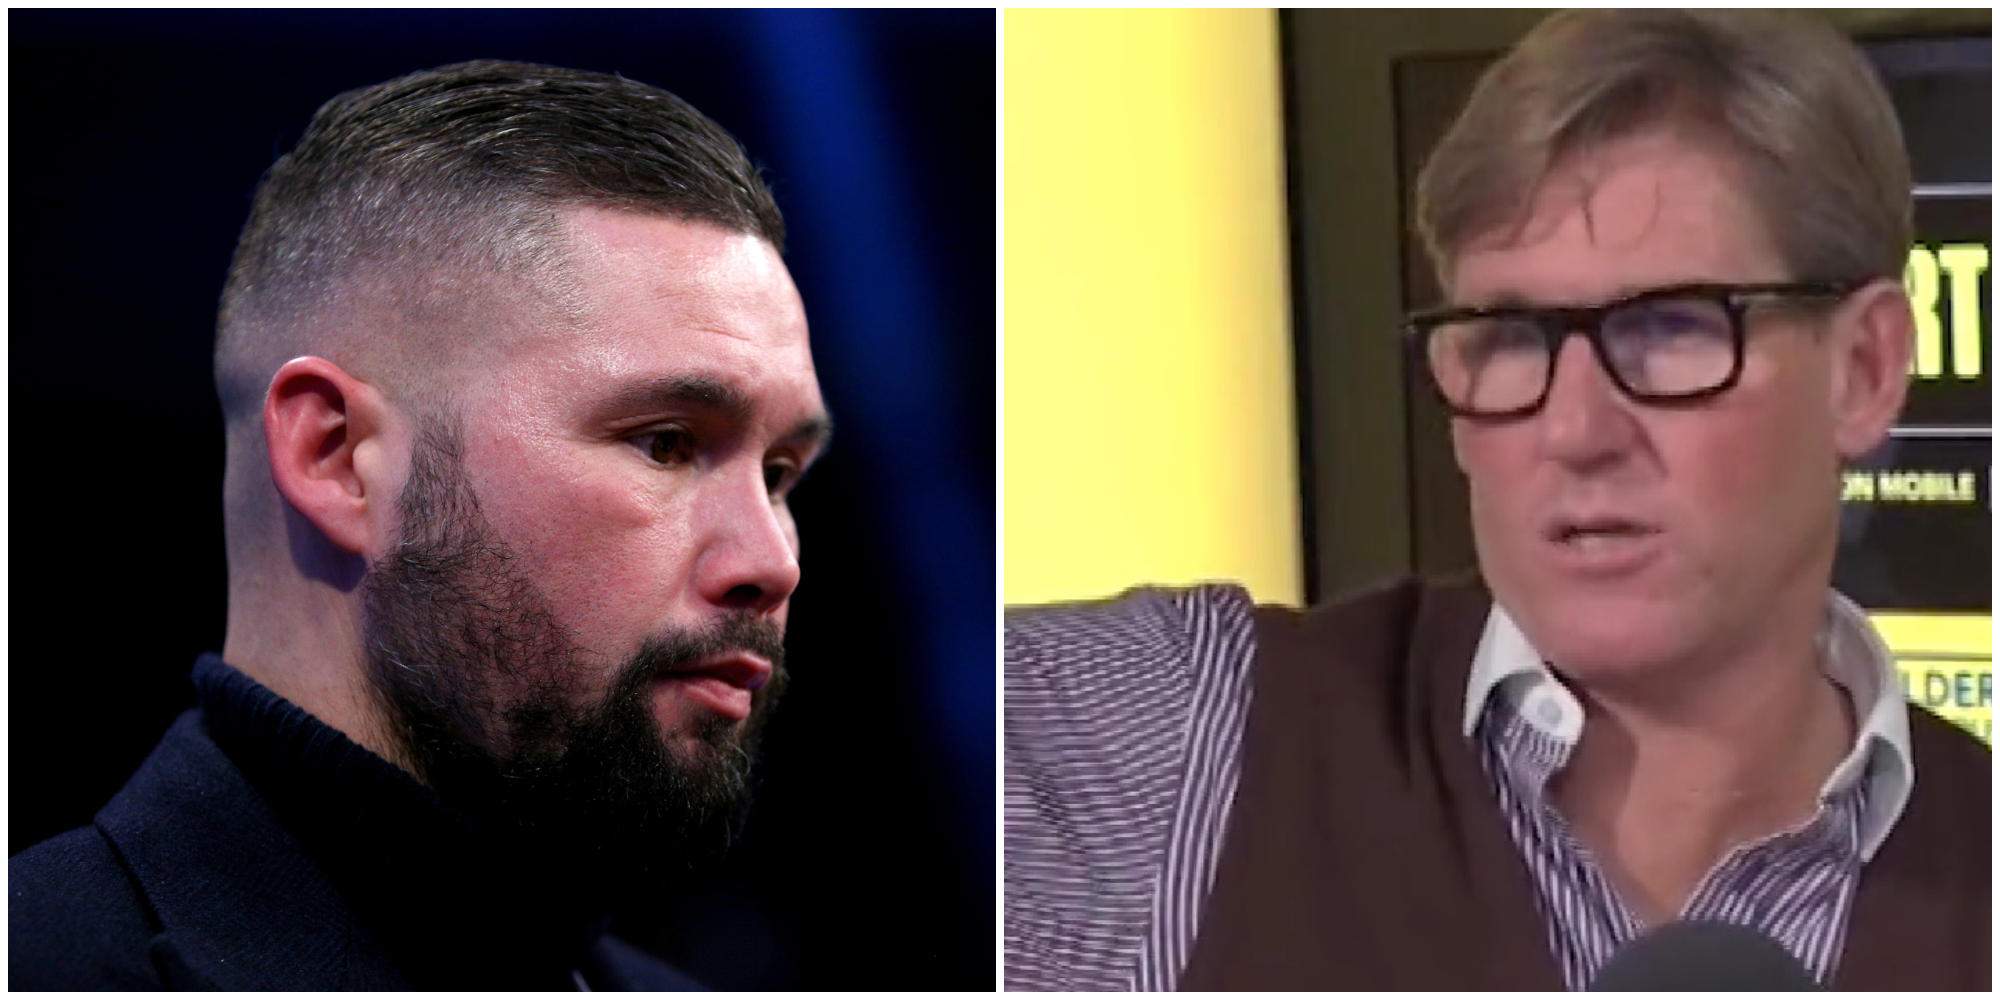 Tony Bellew gets into online spat with Simon Jordan over Liverpool ‘buy properly’ comments